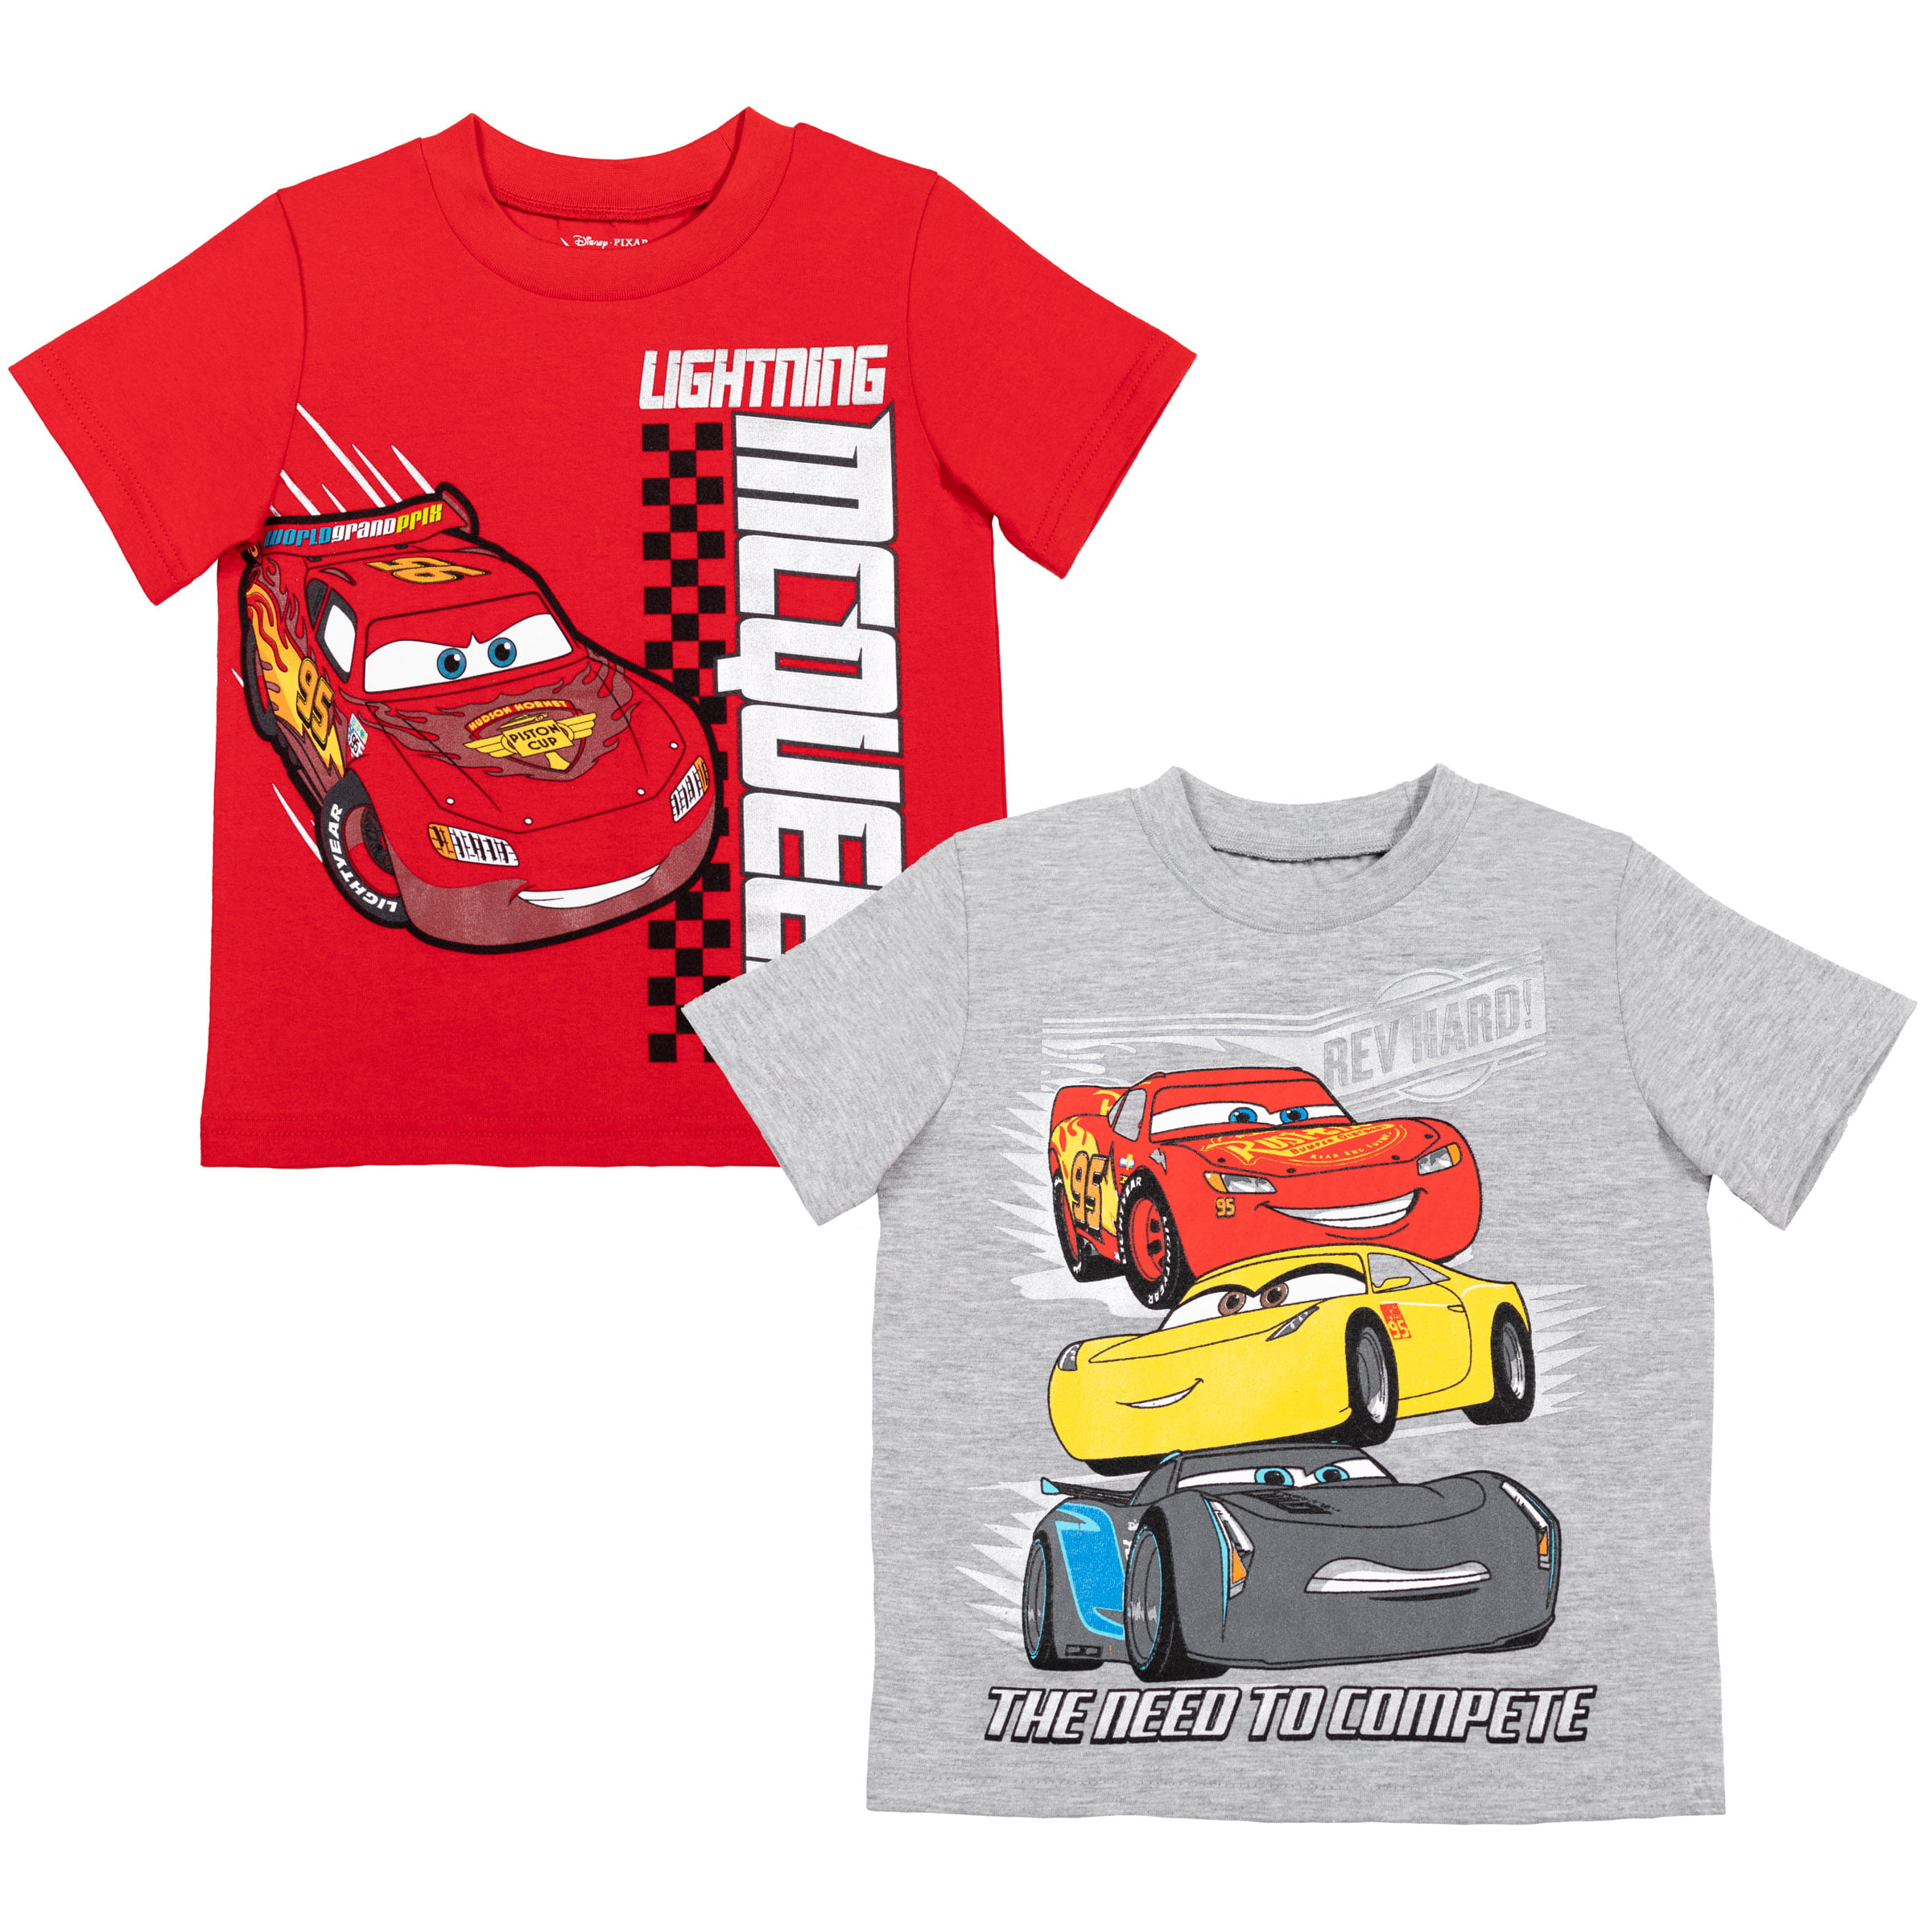 New Cars Lightning McQueen Personalized Birthday T Shirt Party Favor Gift  # 2 